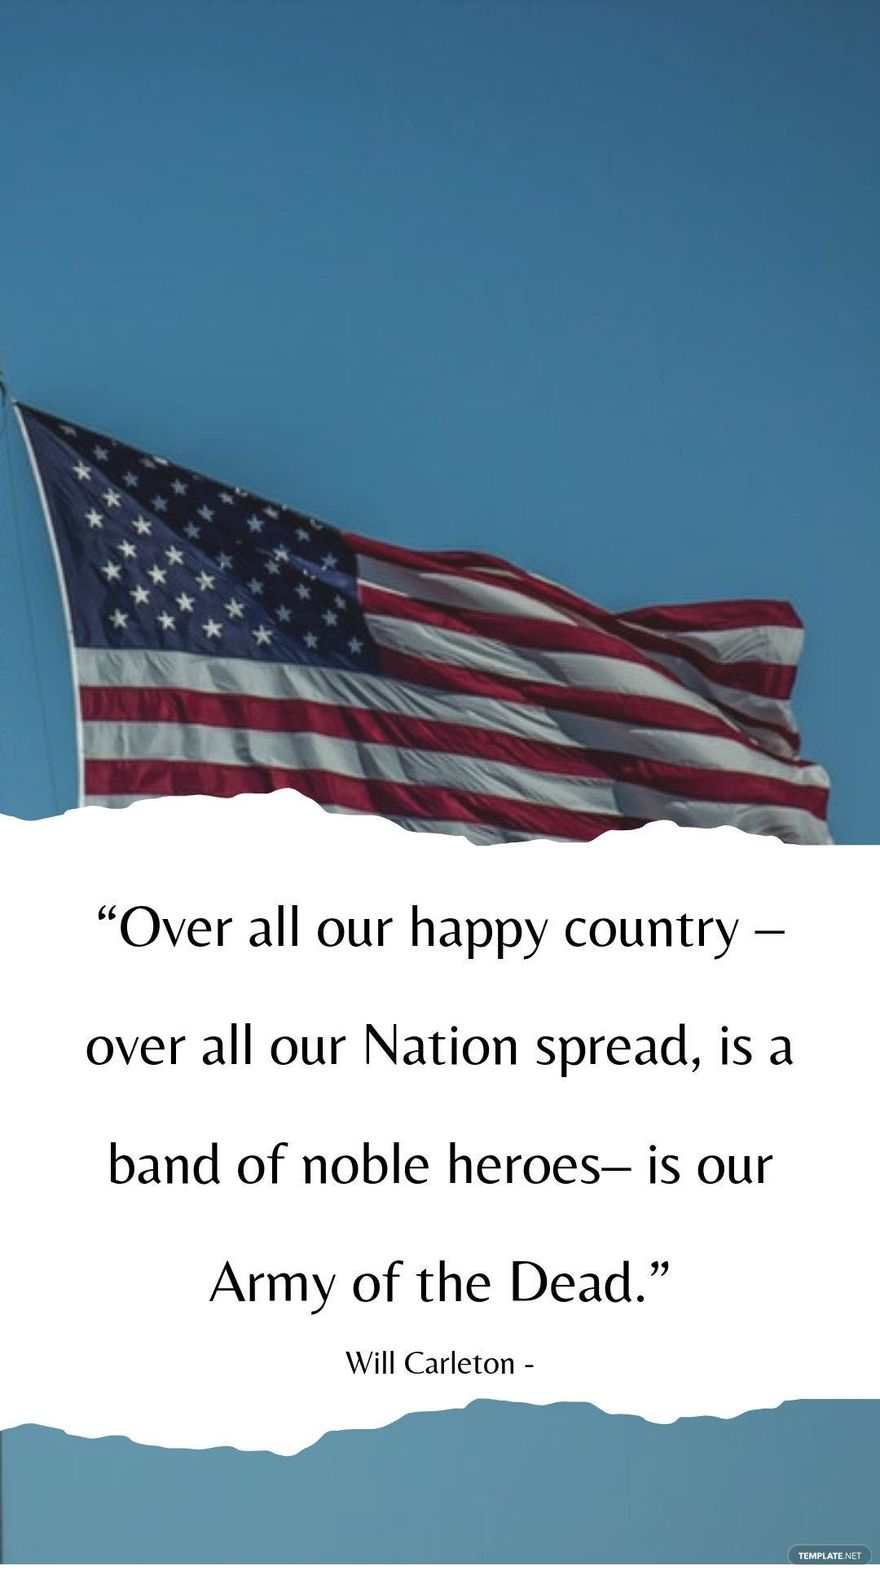 Will Carleton - “Over all our happy country – over all our Nation spread, is a band of noble heroes– is our Army of the Dead.”